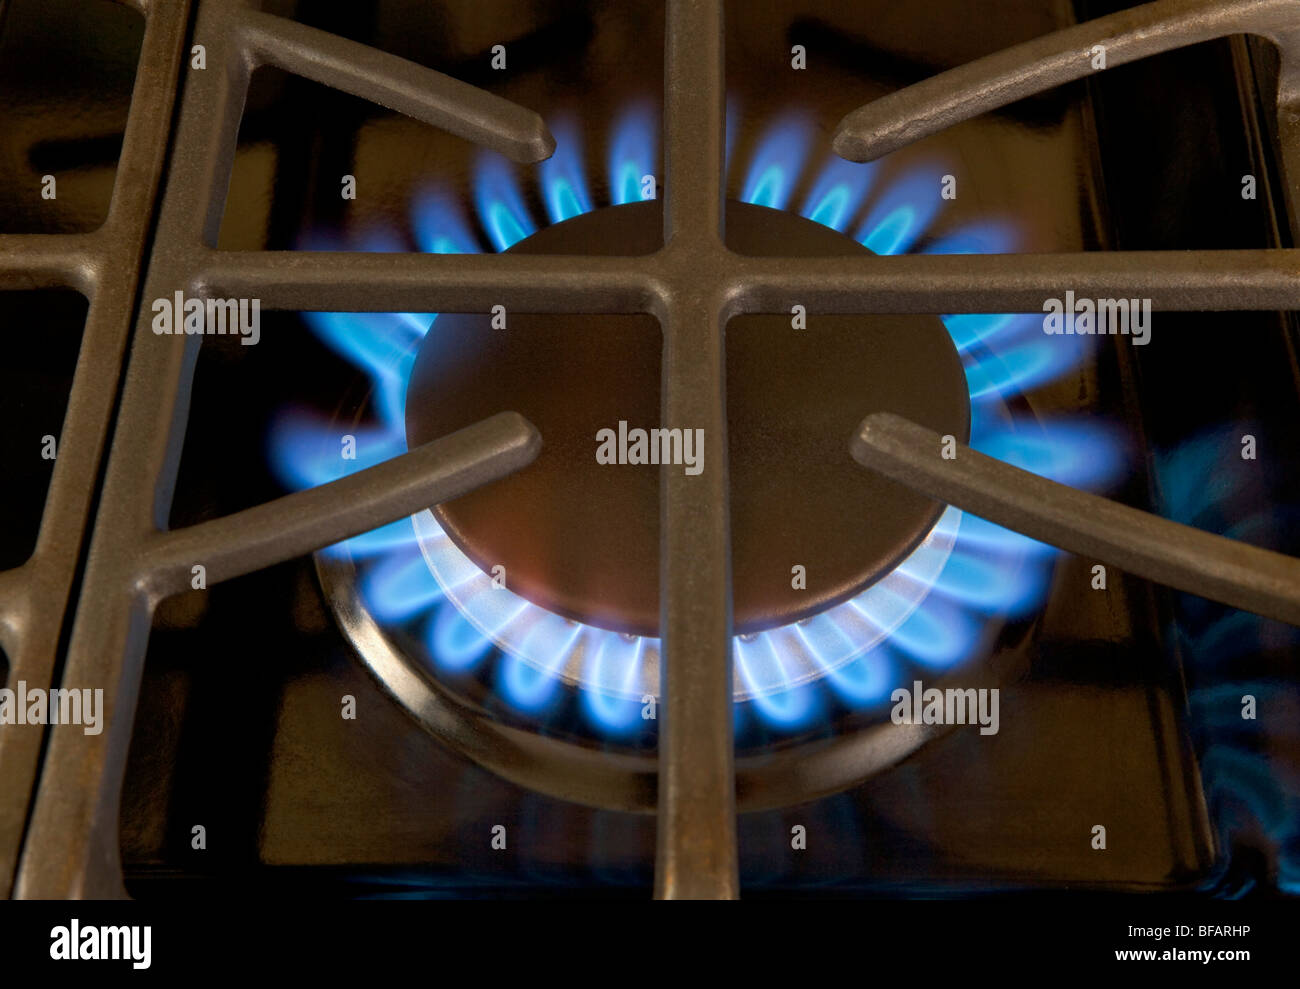 A stove-top gas burner with its blue flames Stock Photo